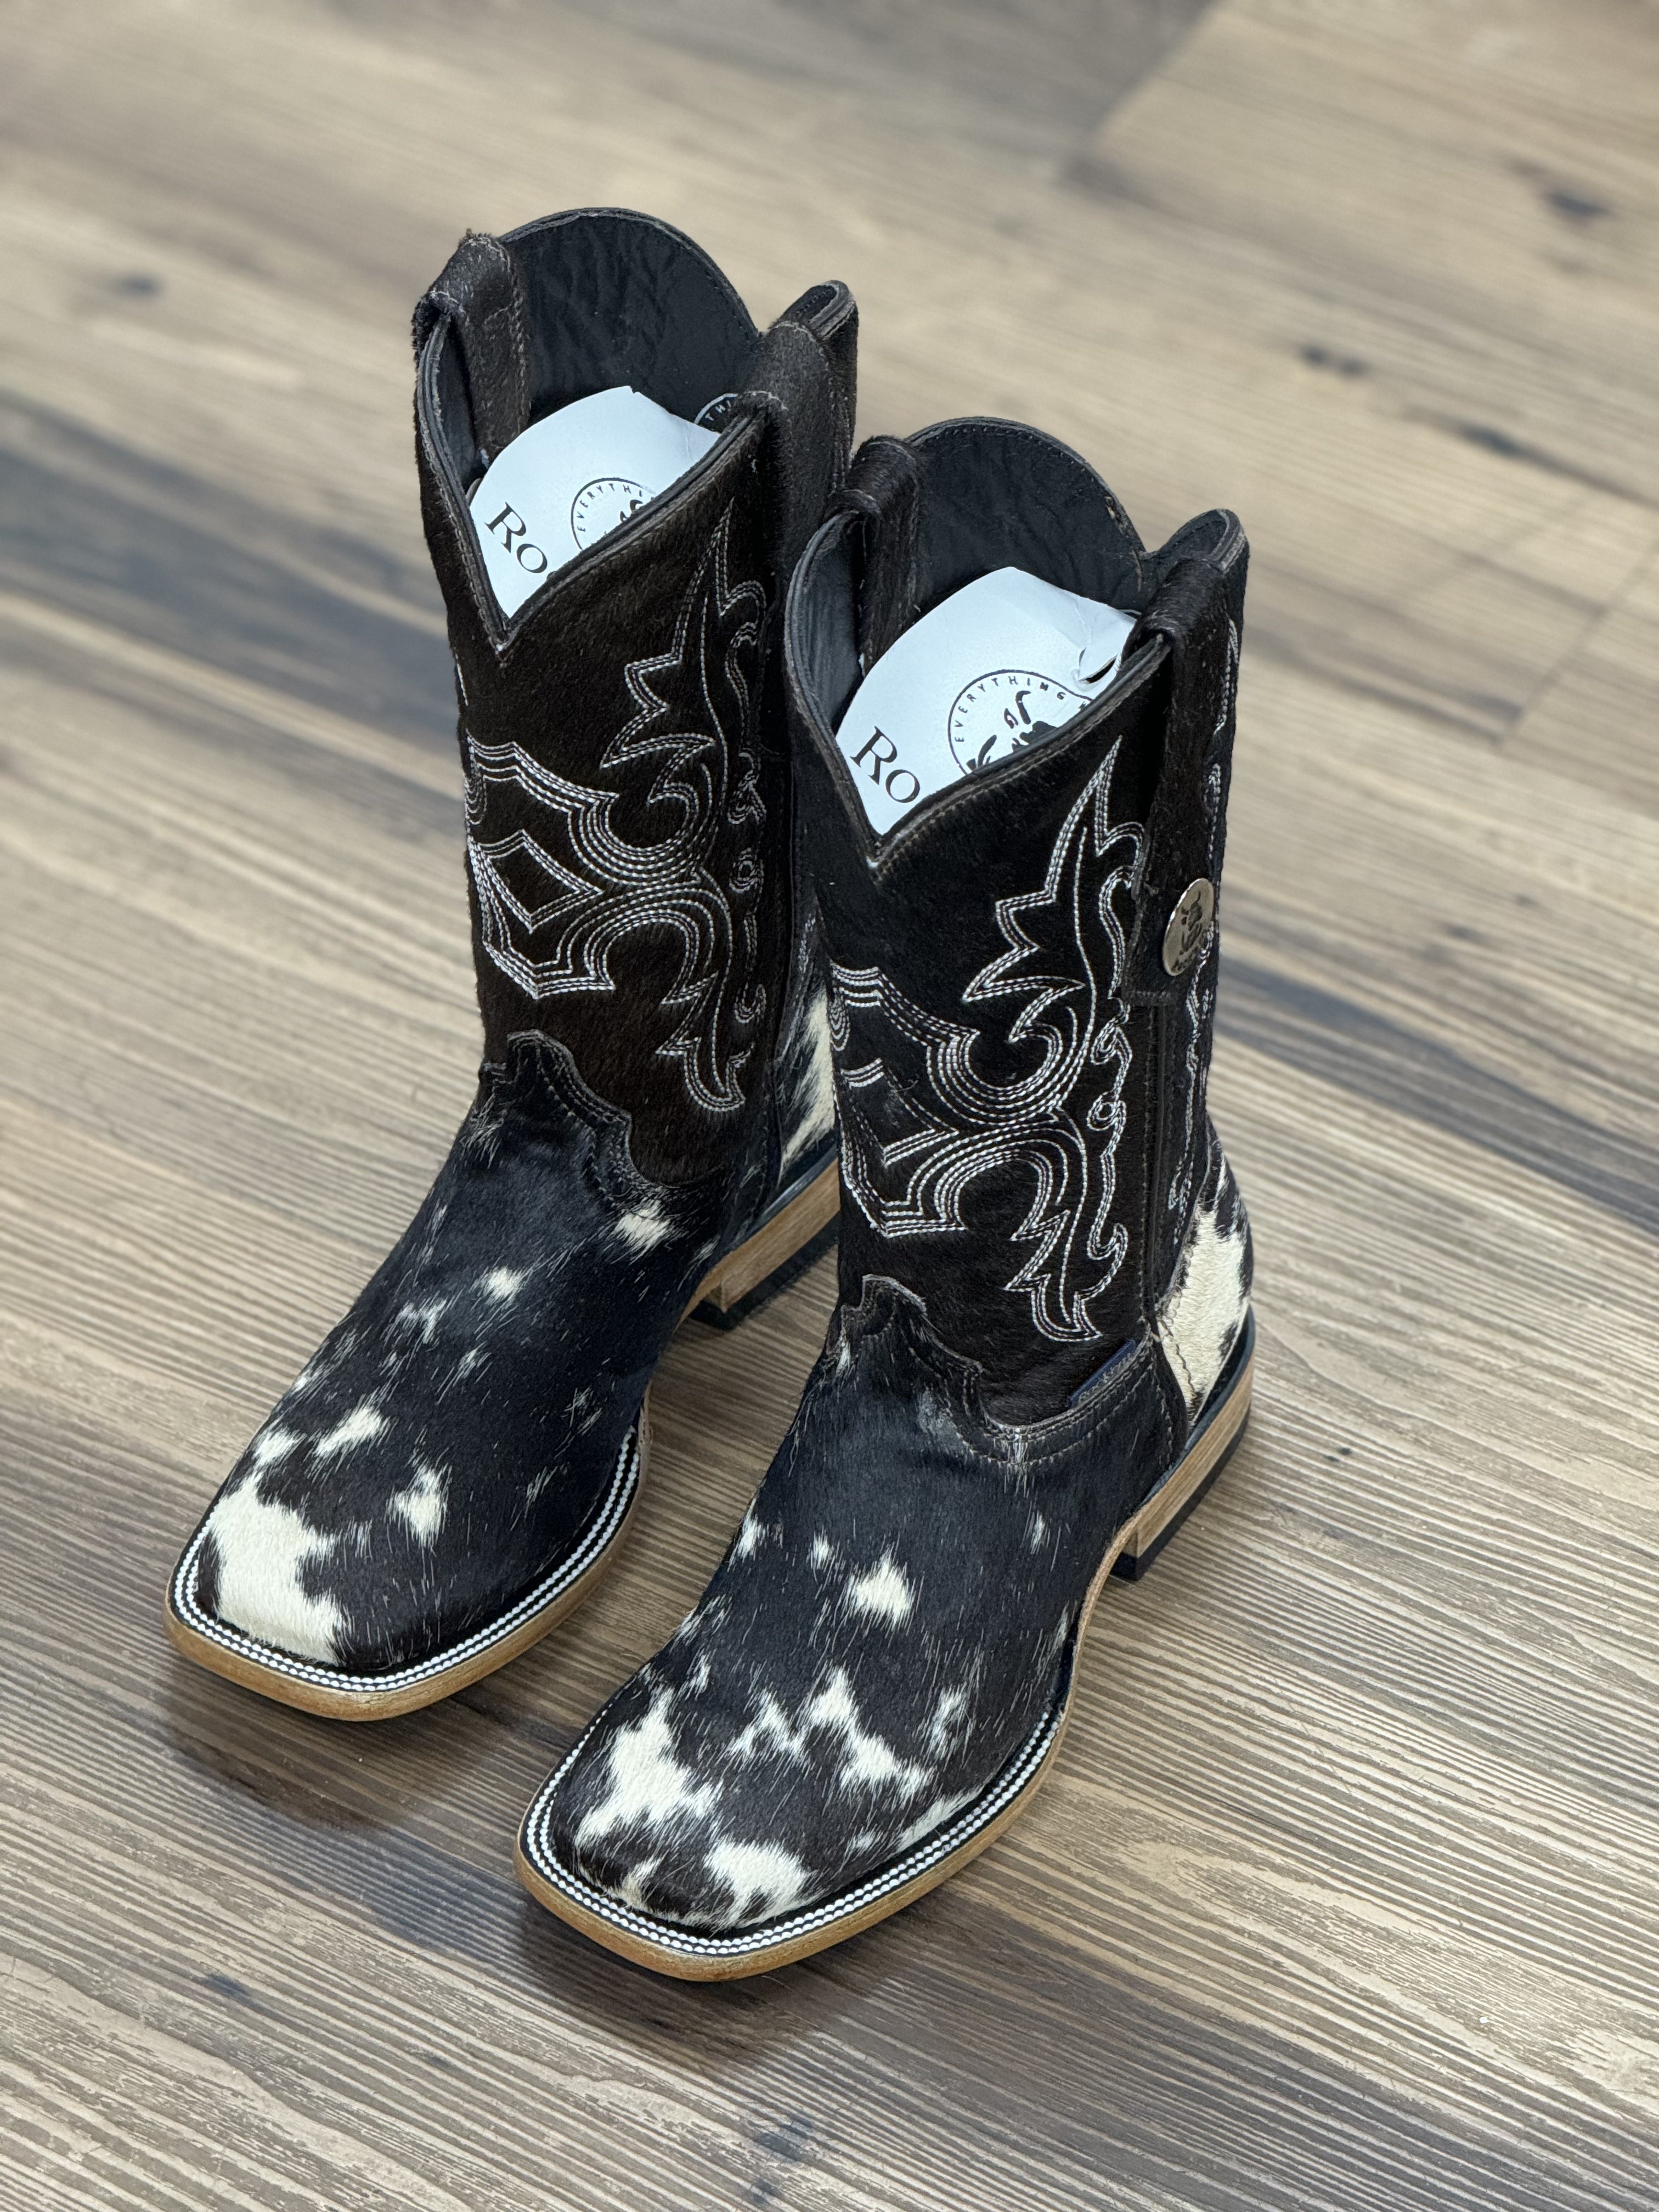 WOMENS ROCK'EM BLACK & WHITE COWHIDE TOP BOOT  KATHERINE (EVERY PAIR IS UNIQUE)